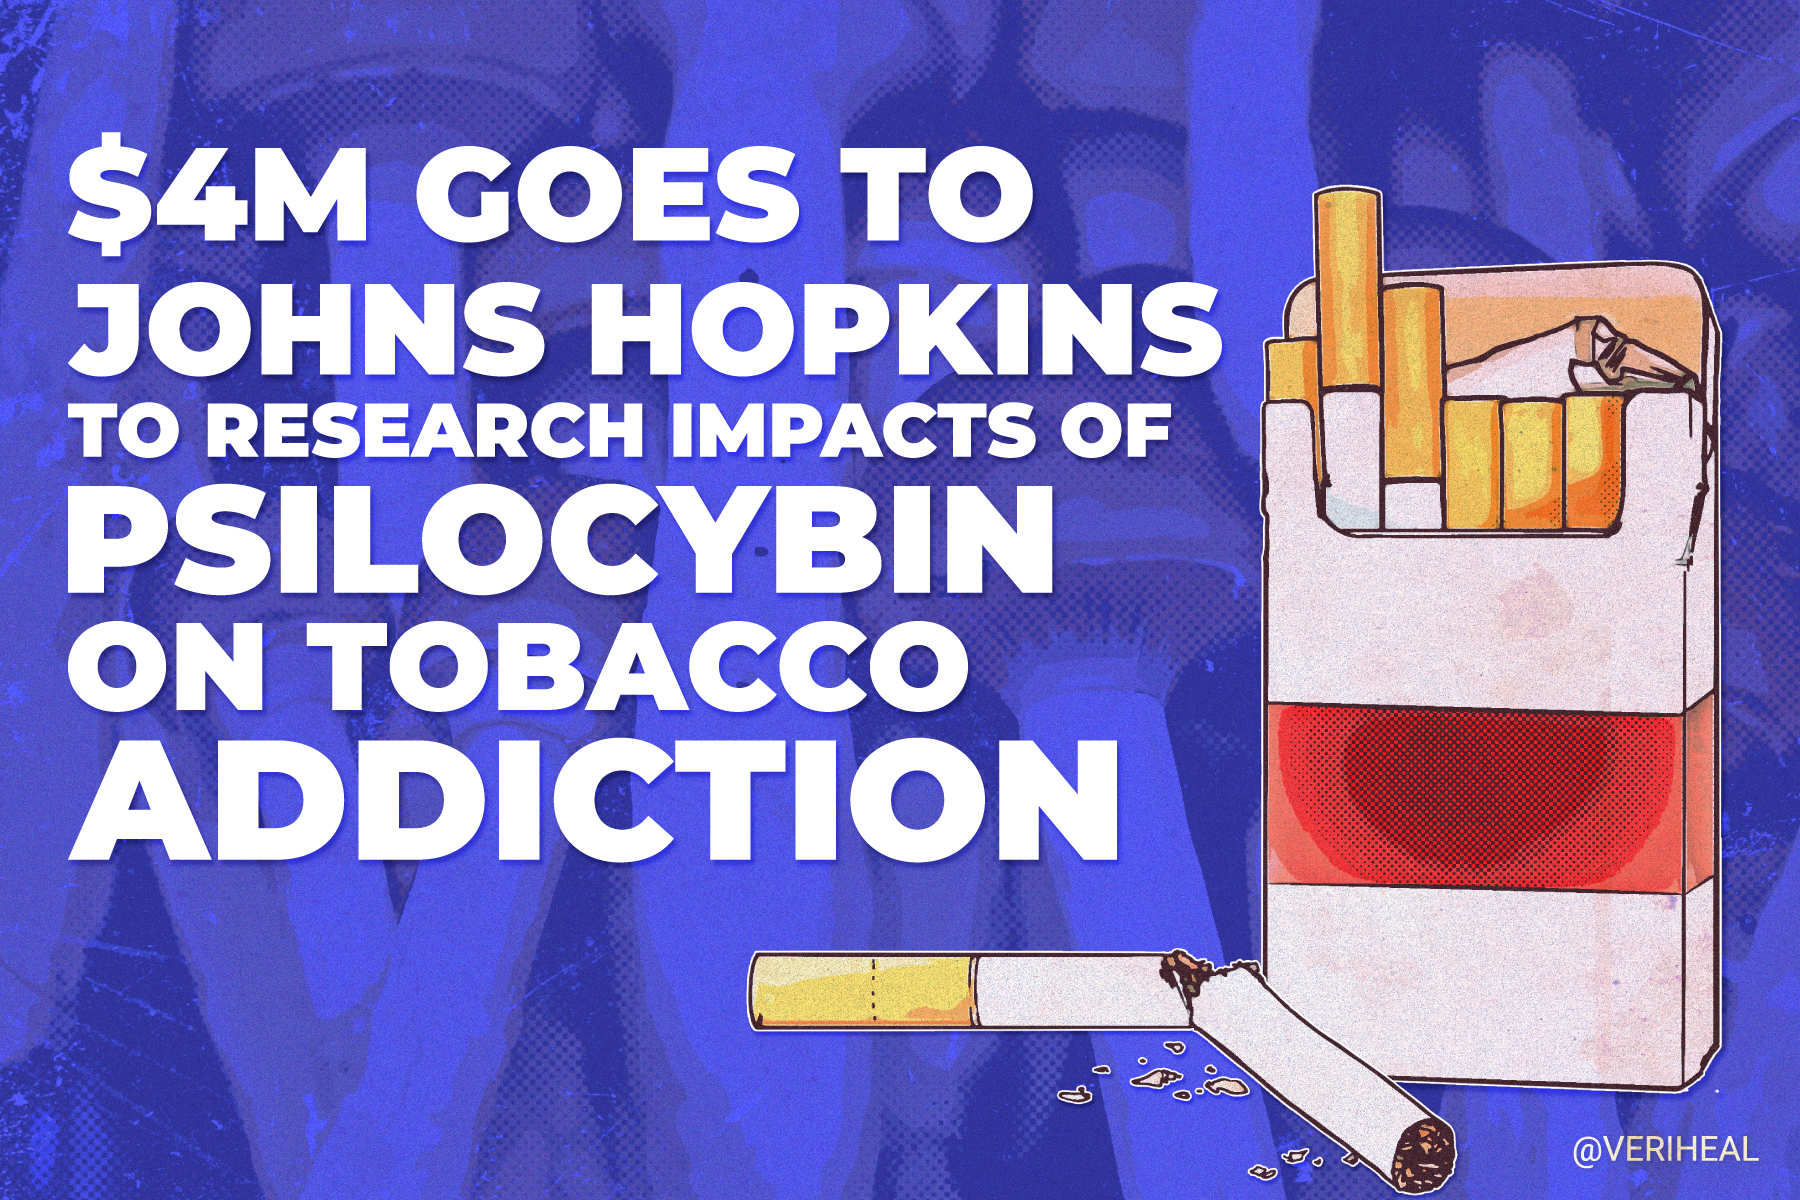 Johns Hopkins Receives $4M To Research Impacts of Psilocybin on Tobacco Addiction